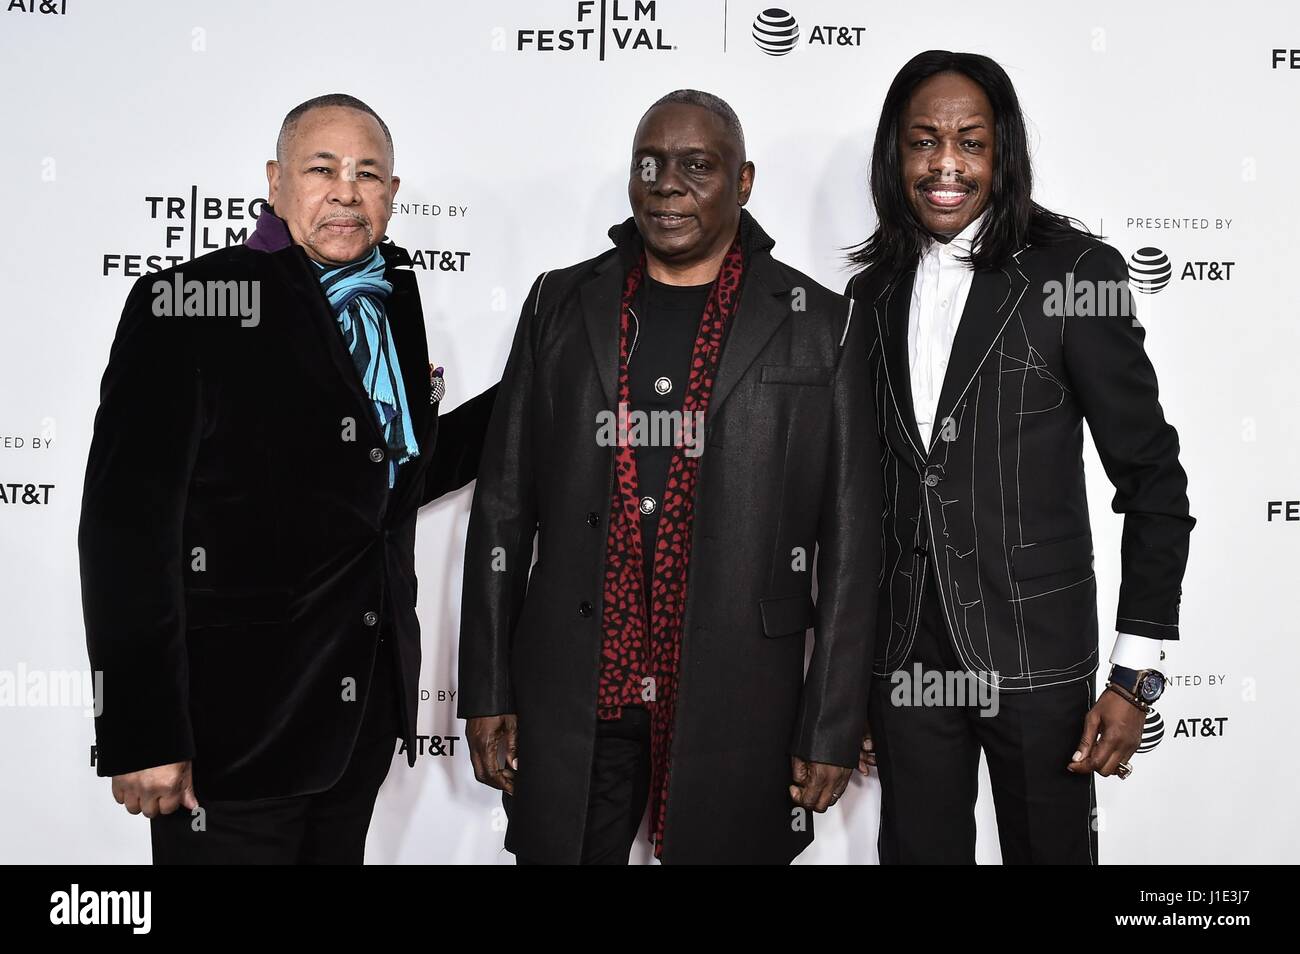 New York, NY, USA. 19th Apr, 2017. Ralph Johnson, Phillip Bailey, Verdine White at arrivals for CLIVE DAVIS: THE SOUNDTRACK OF OUR LIVES Opening Night Premiere at the 2017 Tribeca Film Festival, Radio City Music Hall, New York, NY April 19, 2017. Credit: Steven Ferdman/Everett Collection/Alamy Live News Stock Photo